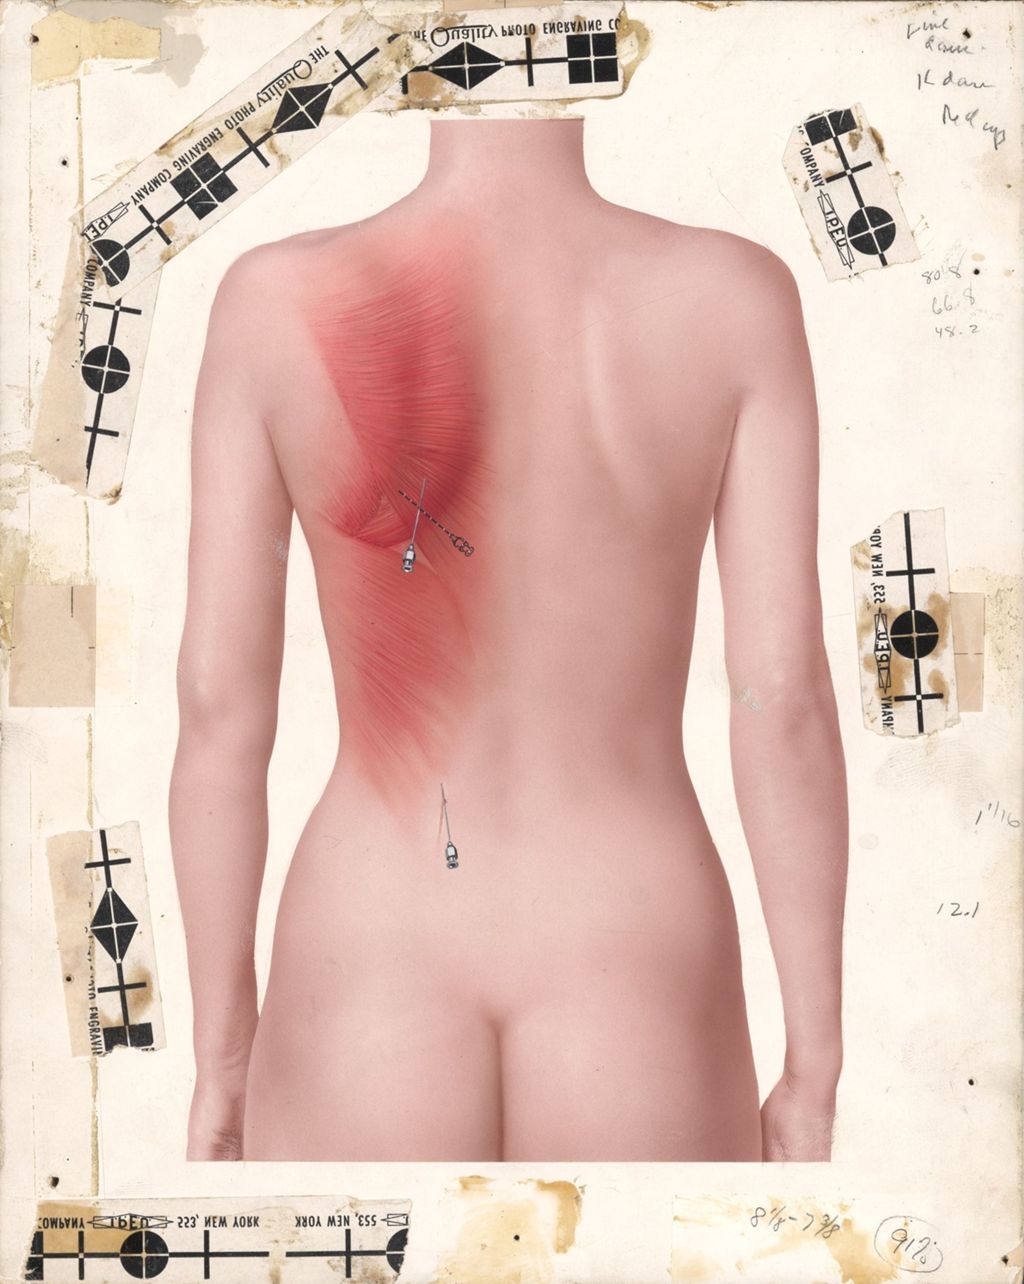 Miniature of Hydeltra, Artwork of woman's back showing needle insertion points under shoulder and lower back